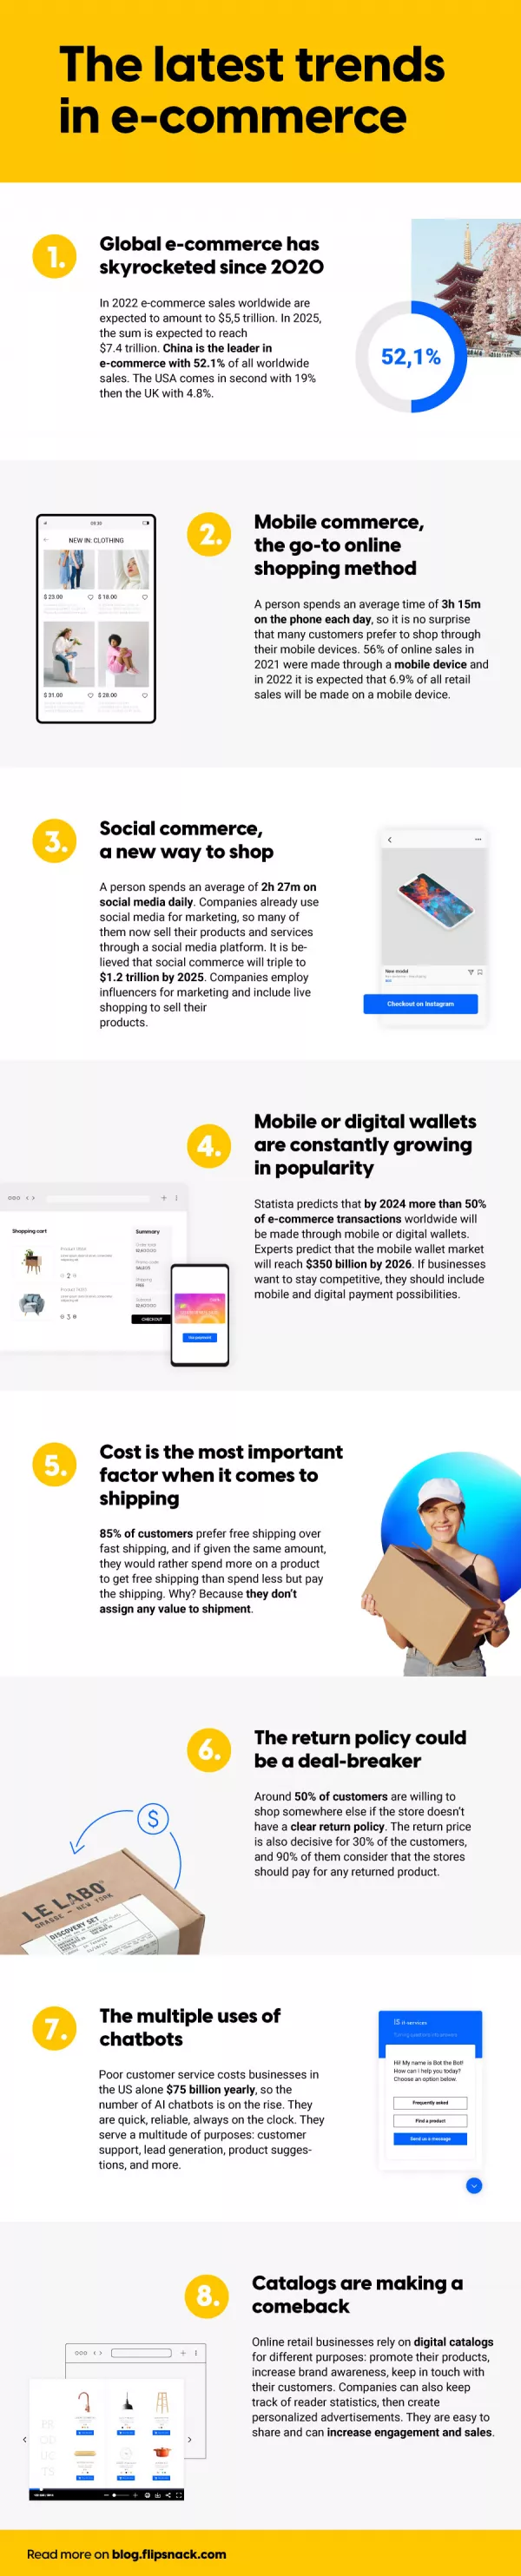 E-commerce trends and statistics infographic